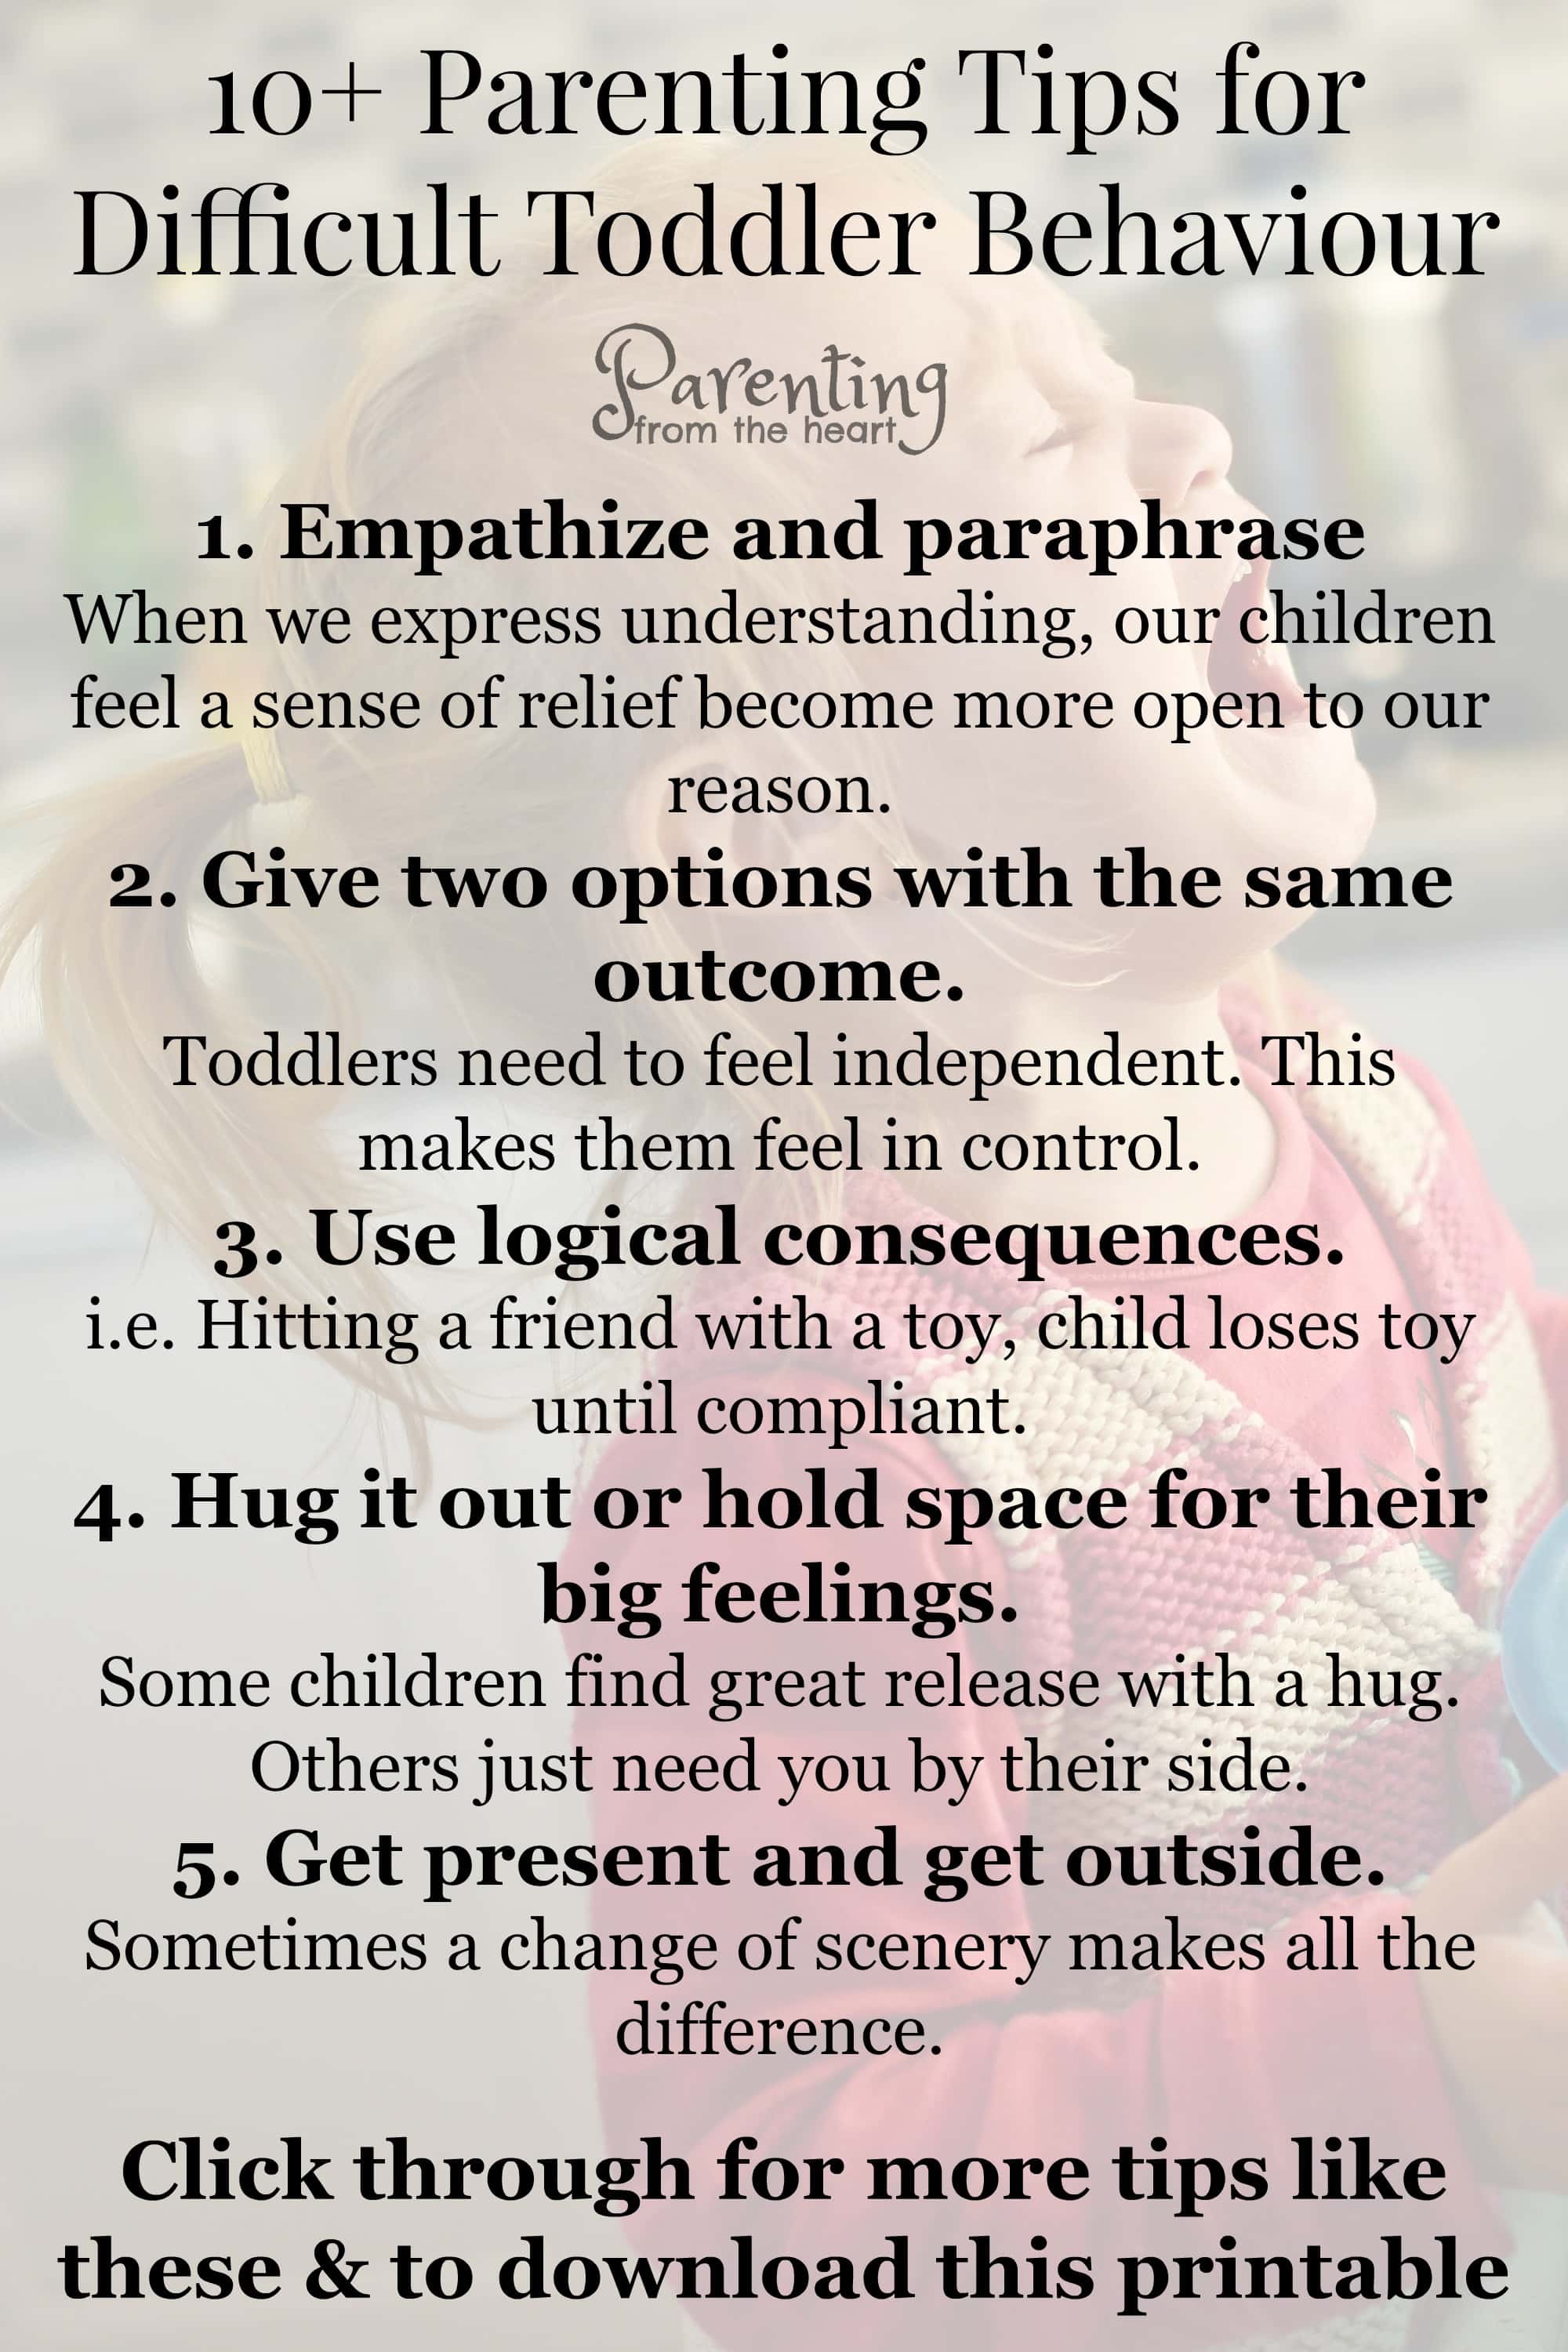 10+ Positive Parenting Strategies for Difficult Toddler